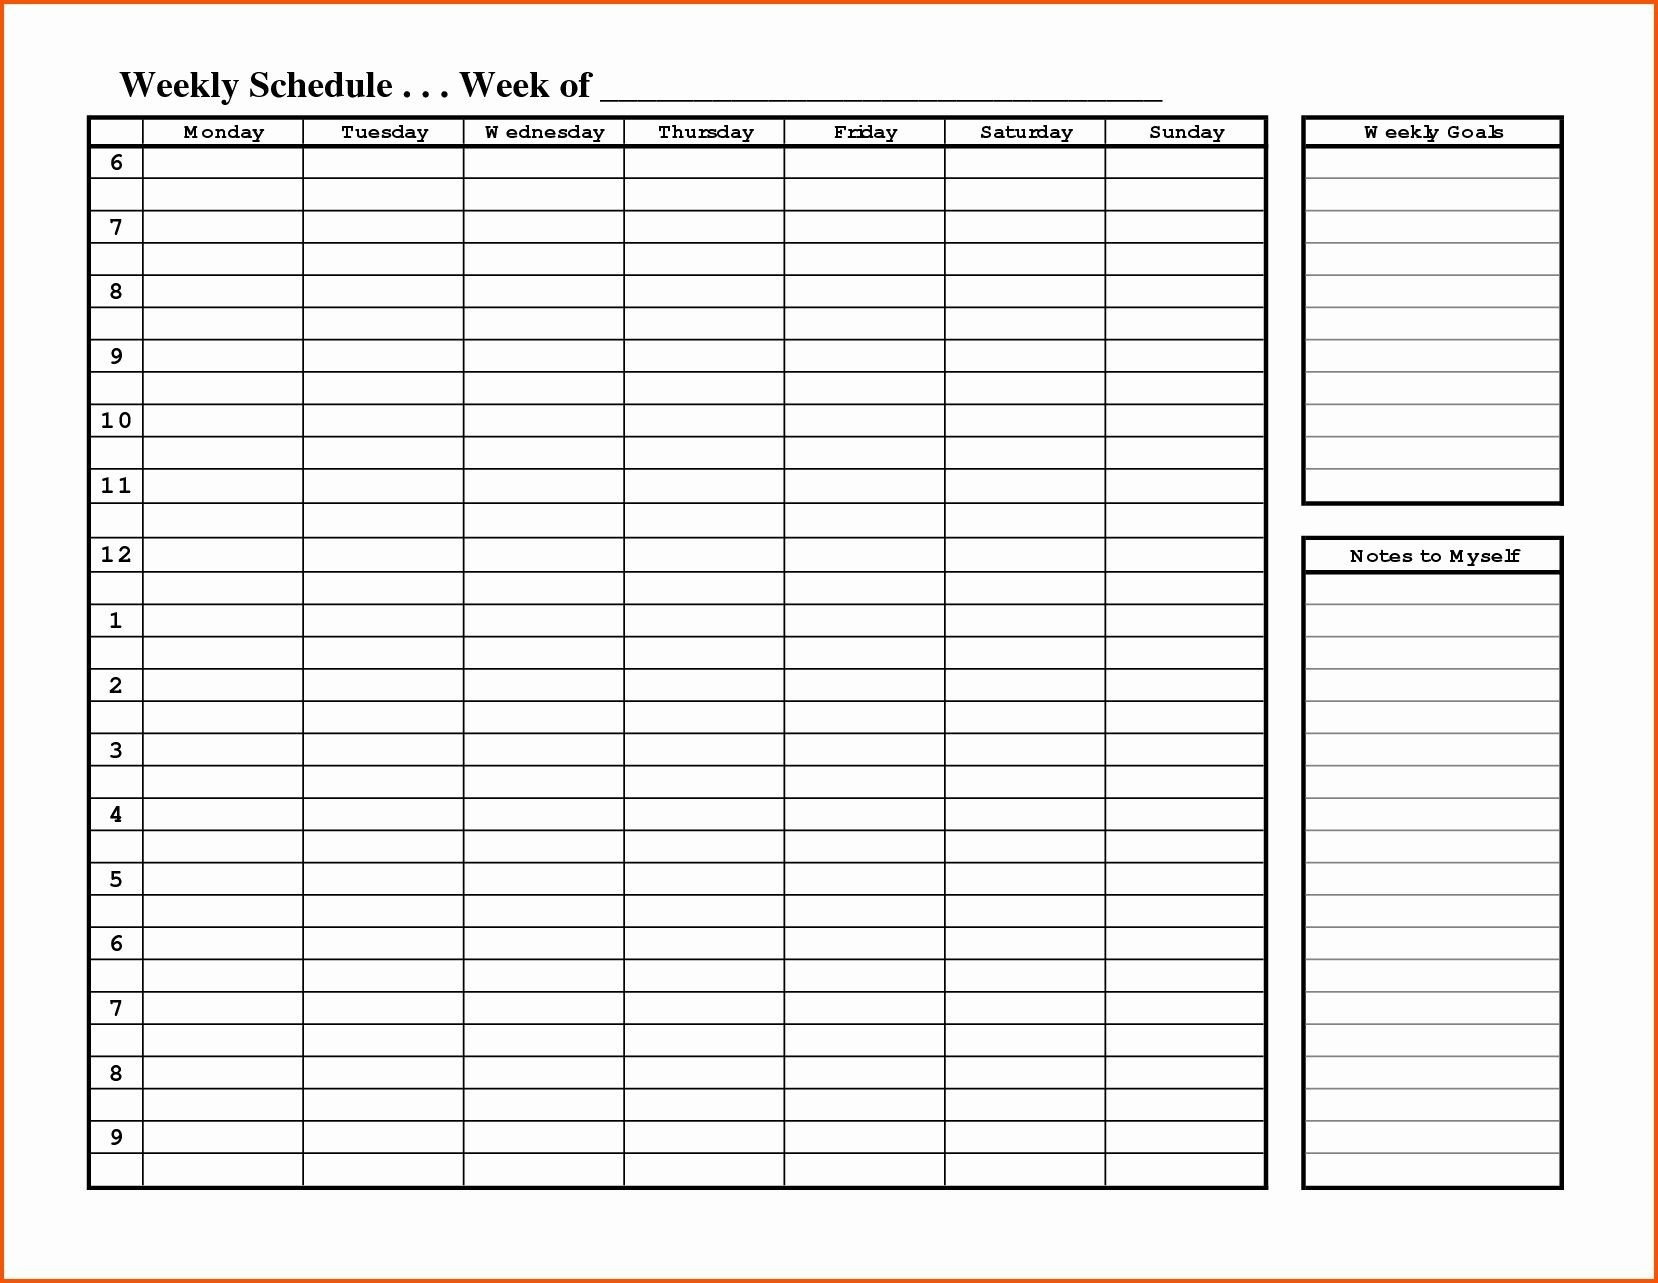 Monday To Sunday Weekly Planner Template Word | Calendar Schedule To Print Sunday To Saturday